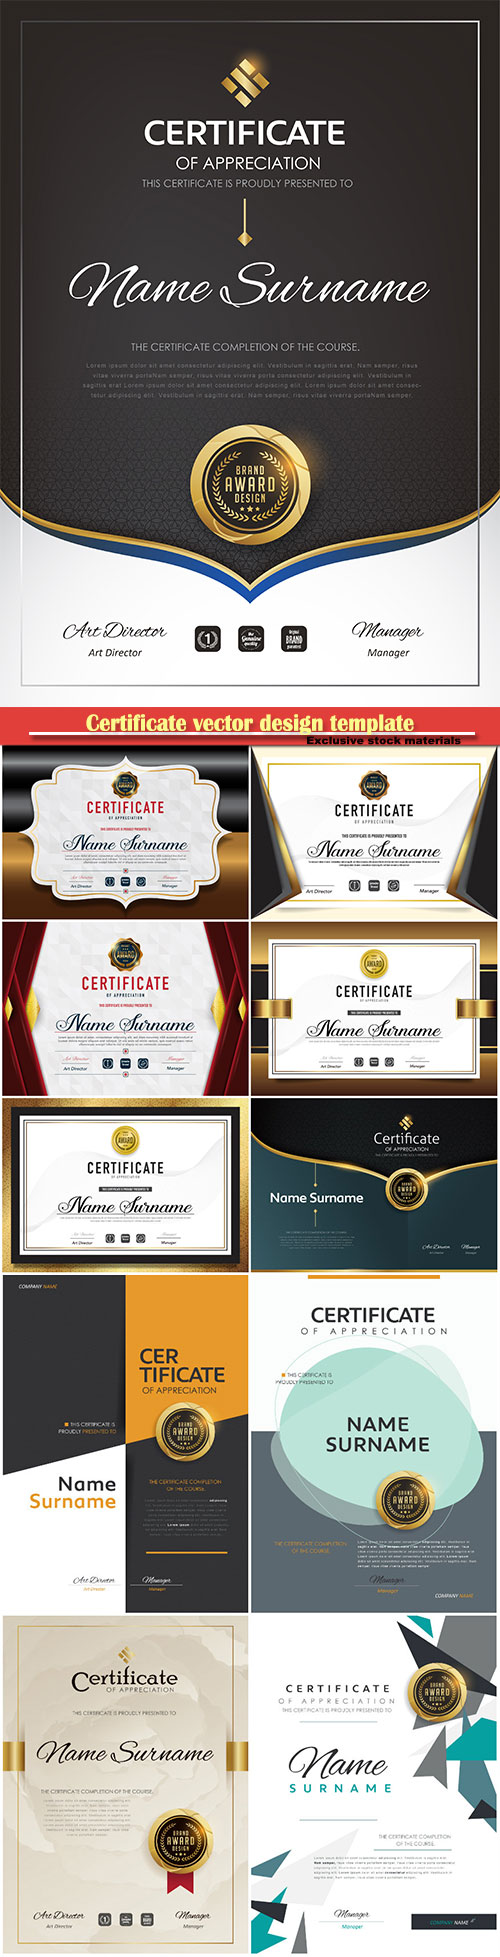 Certificate and vector diploma design template # 57